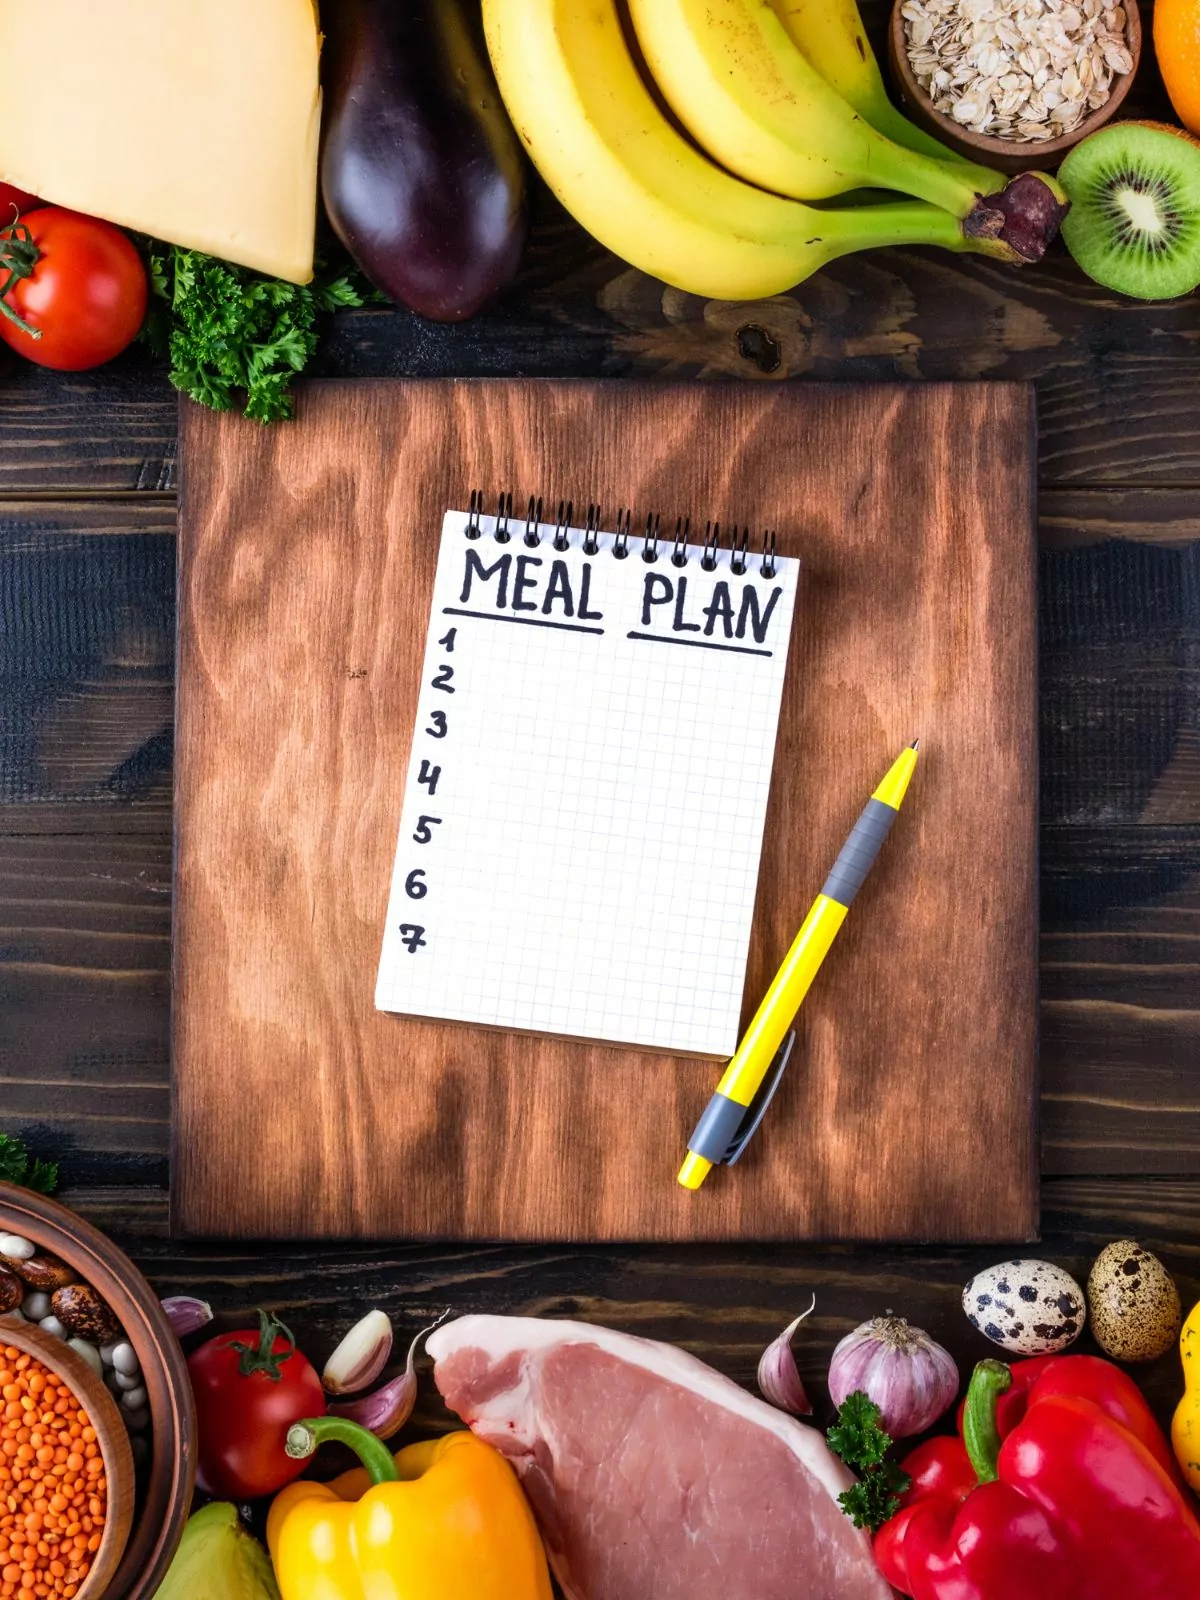 meal plan notebook on cutting board with fruits, vegetables and meat.